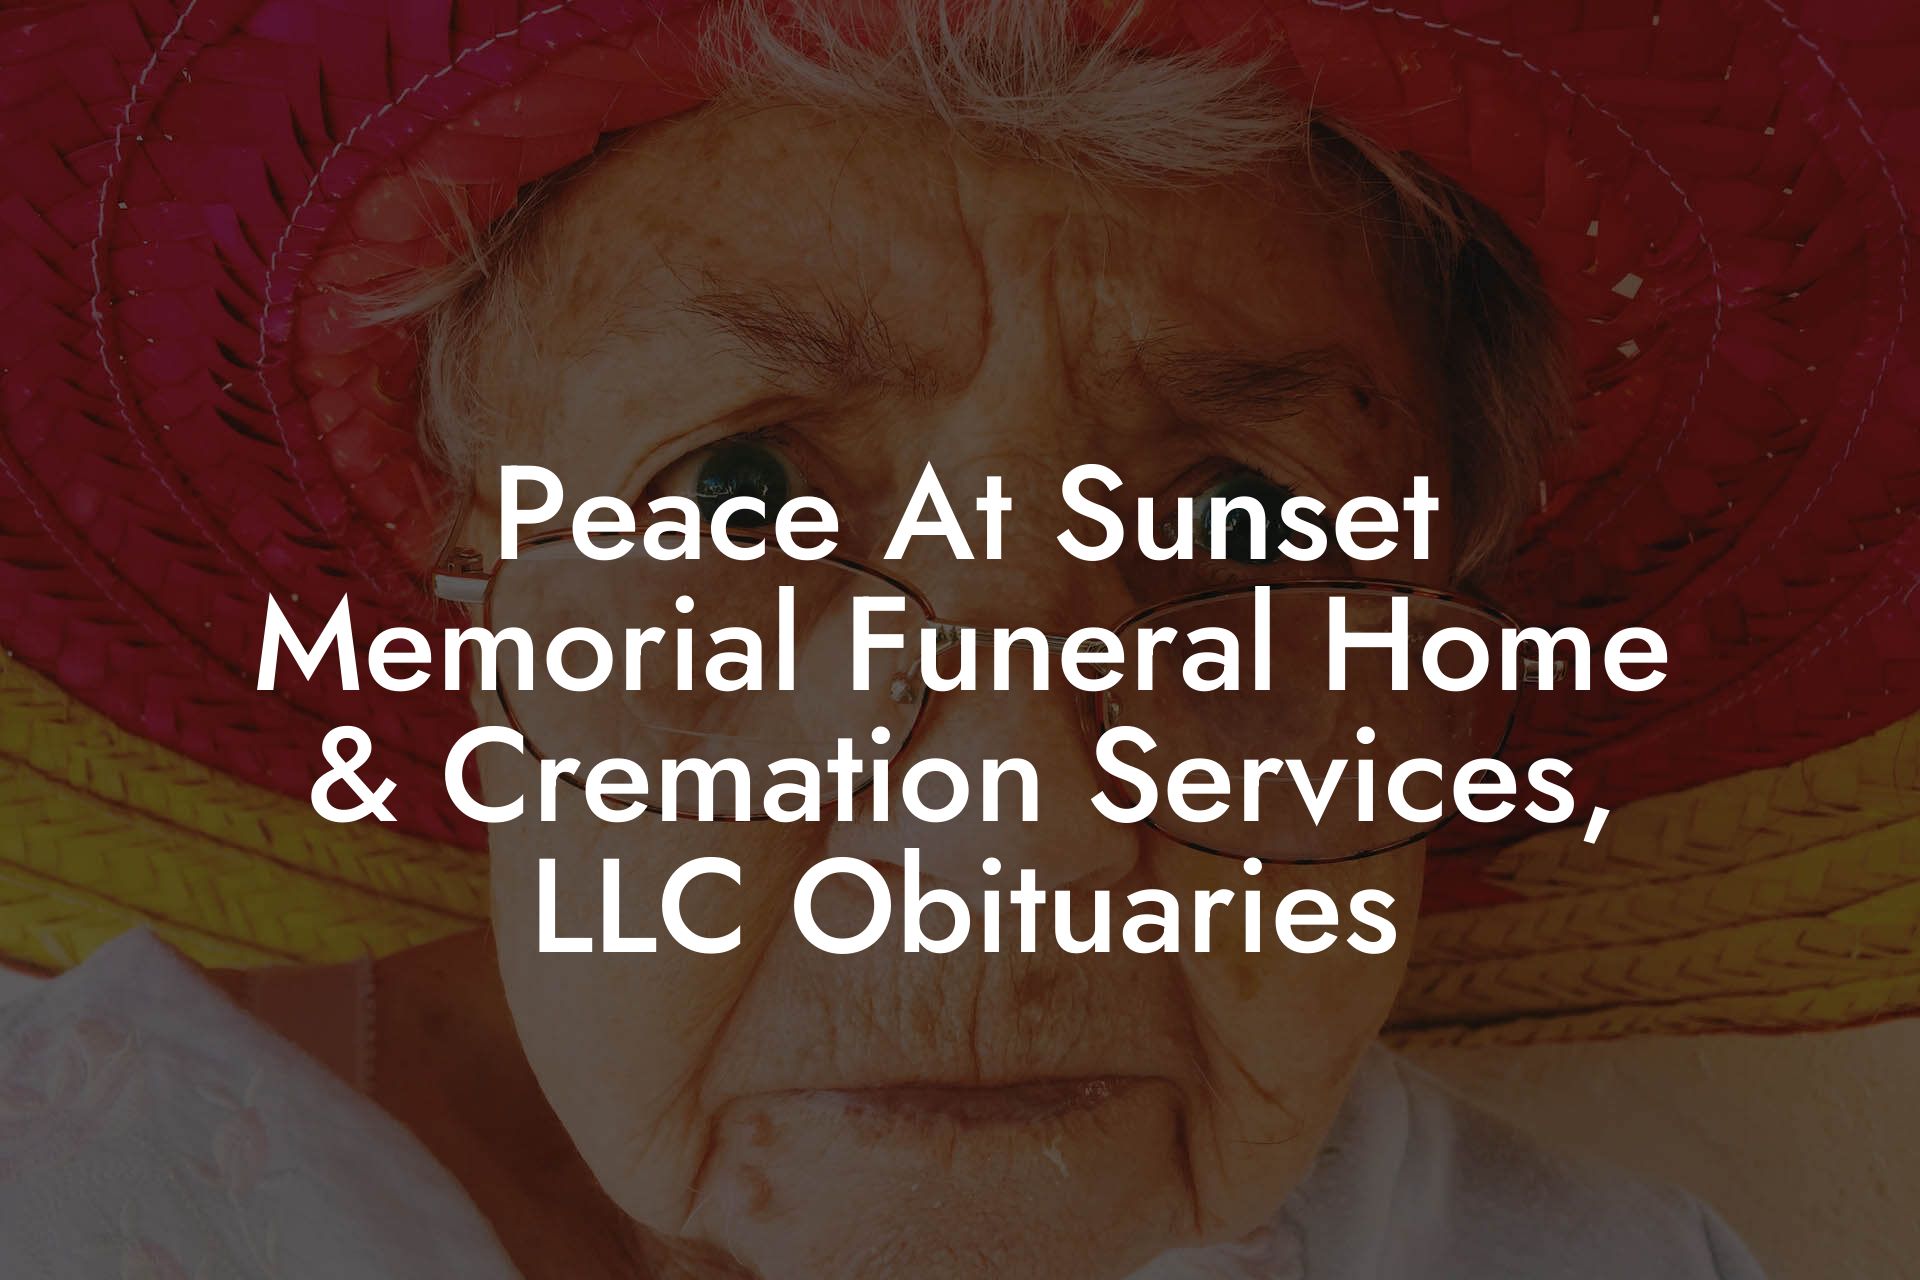 Peace At Sunset Memorial Funeral Home & Cremation Services, LLC Obituaries